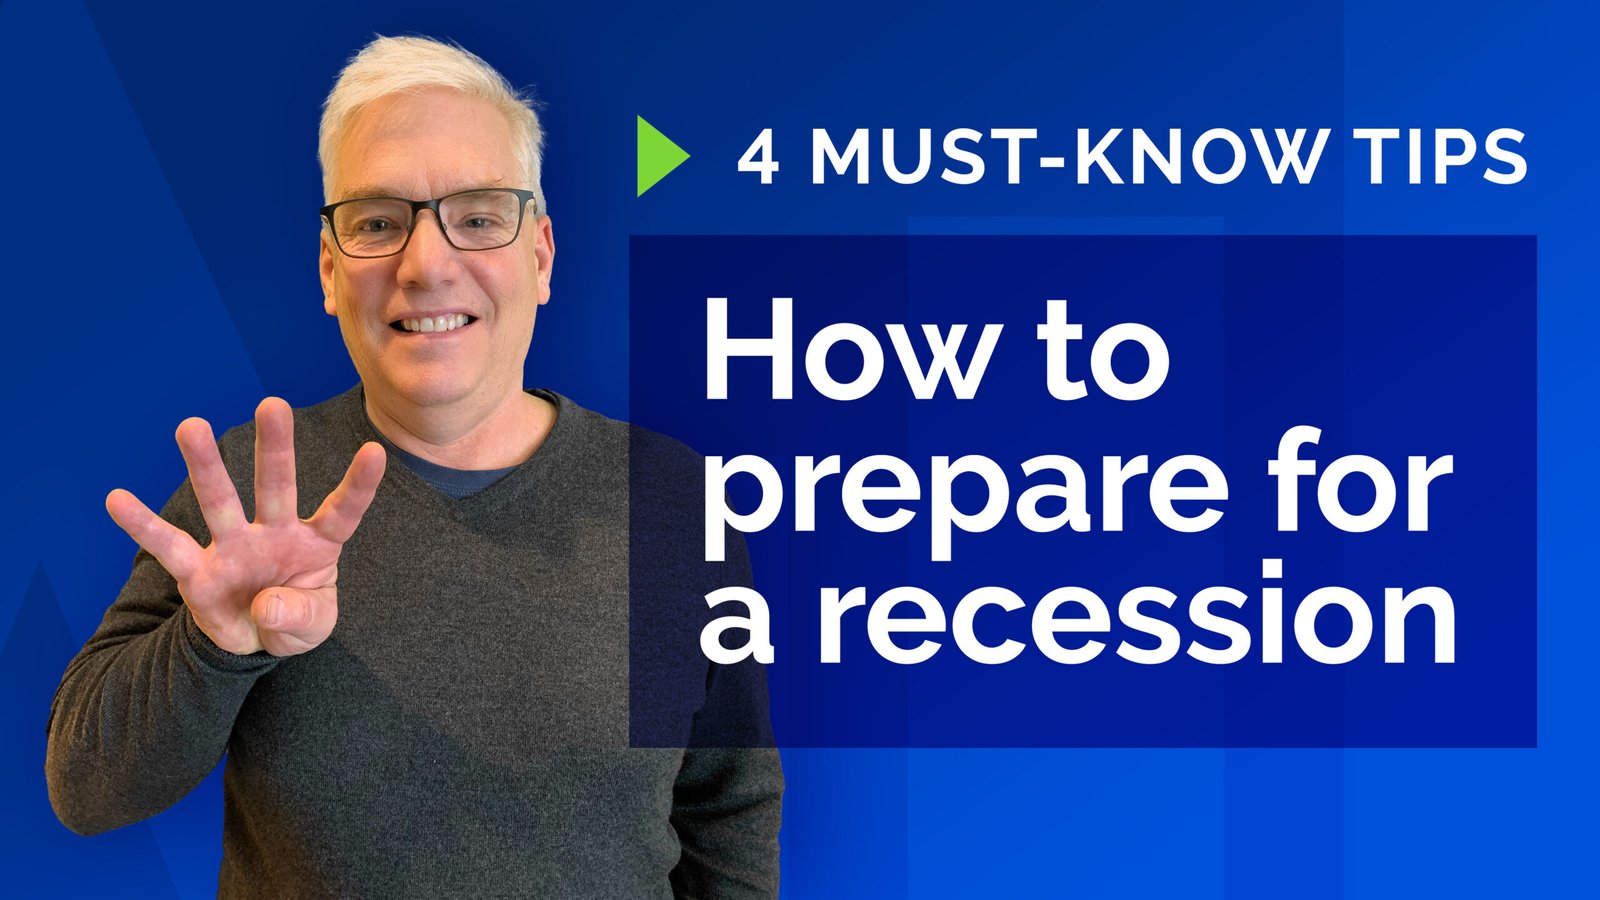 YouTube cover art for "4 must-know tips, how to prepare for a recession